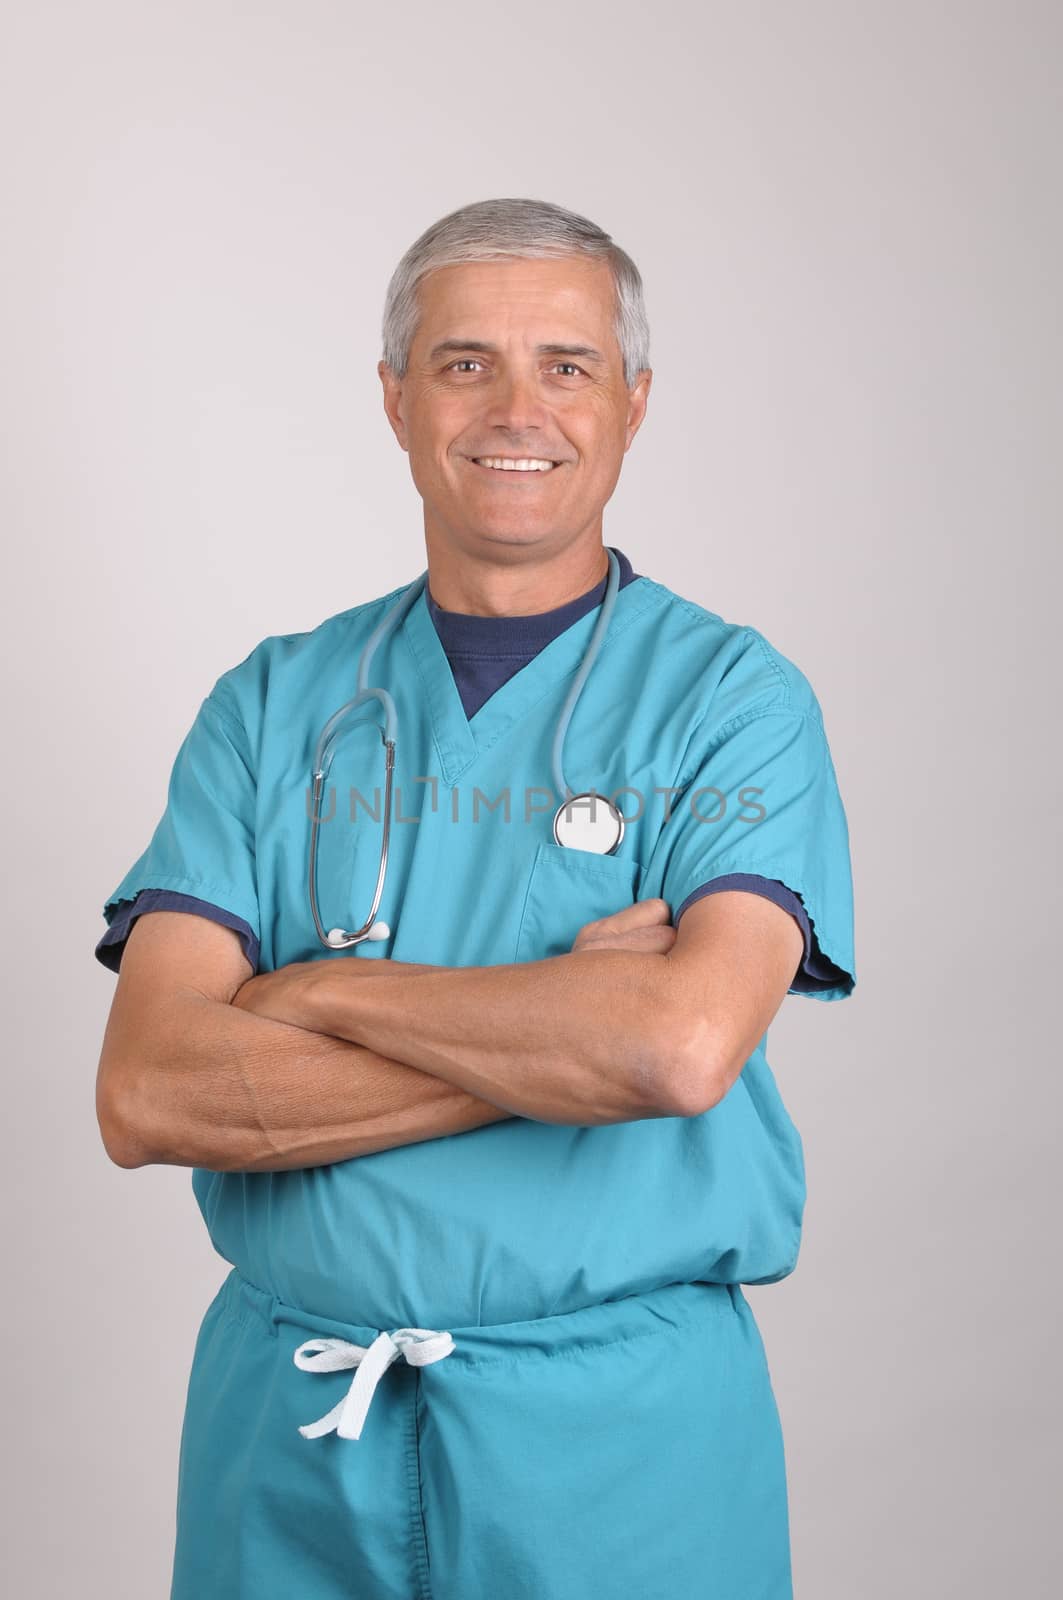 Doctor in Scrubs with  Arms Folded by sCukrov